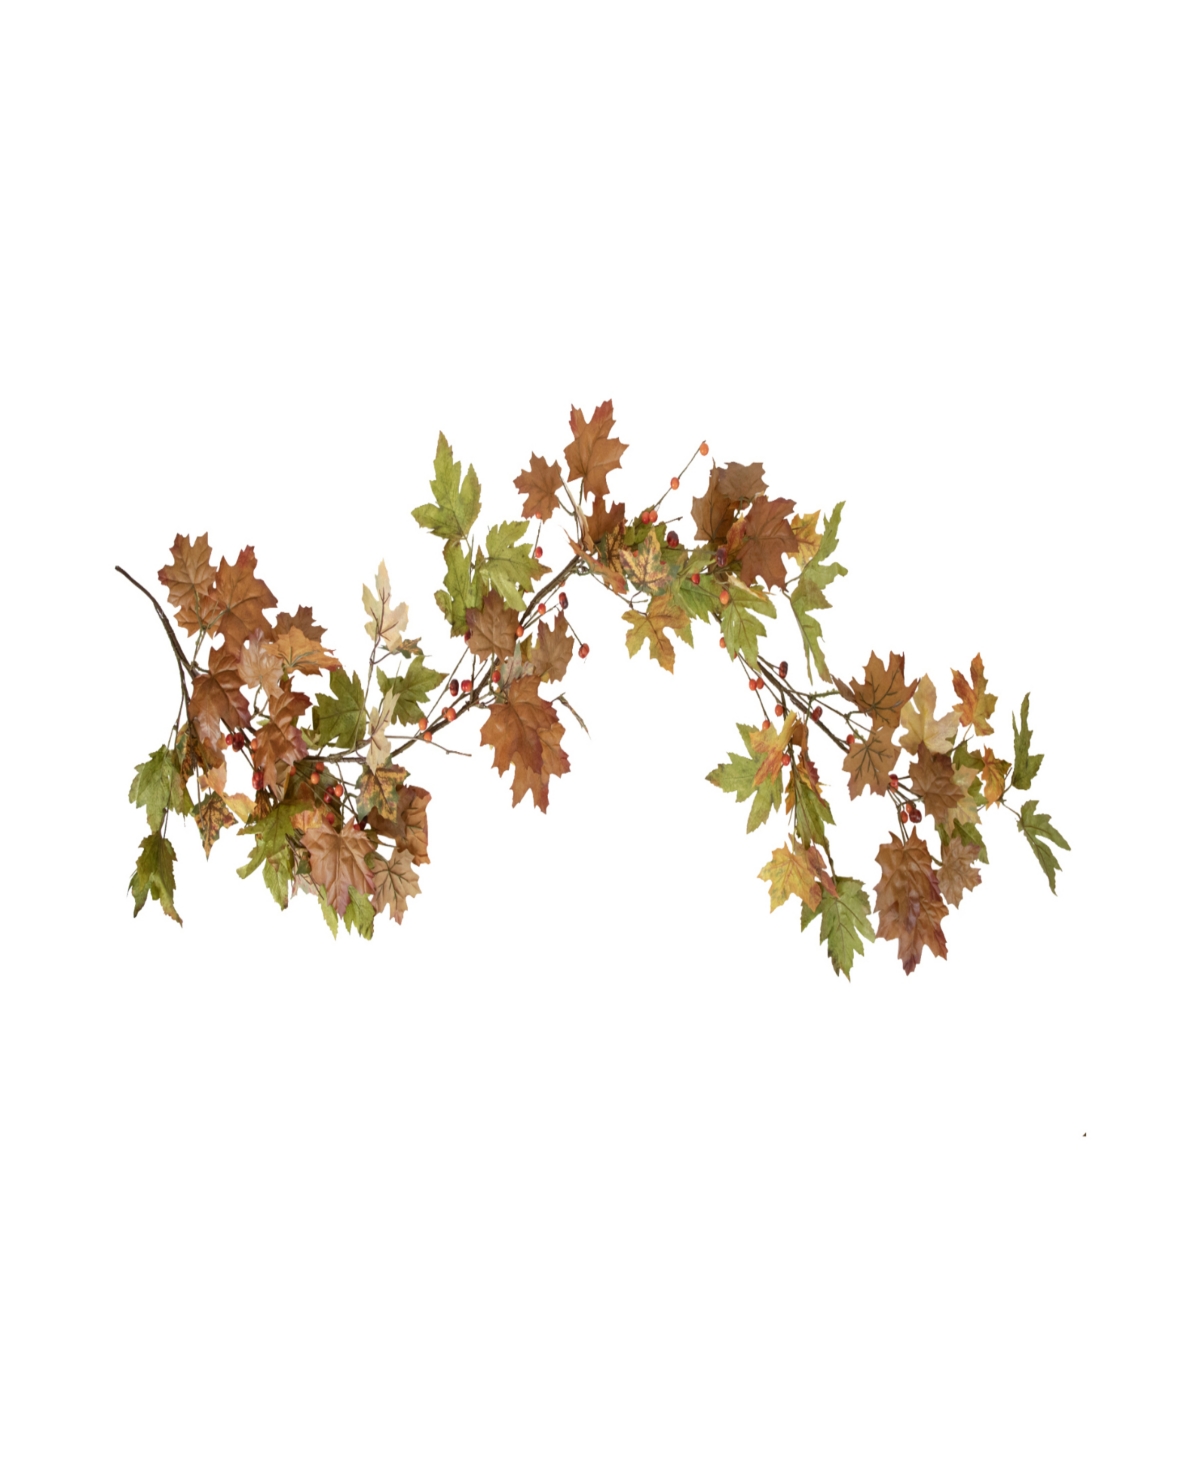 5' x 8" Maple Leaves and Berries Artificial Fall Harvest Garland Unlit - Brown